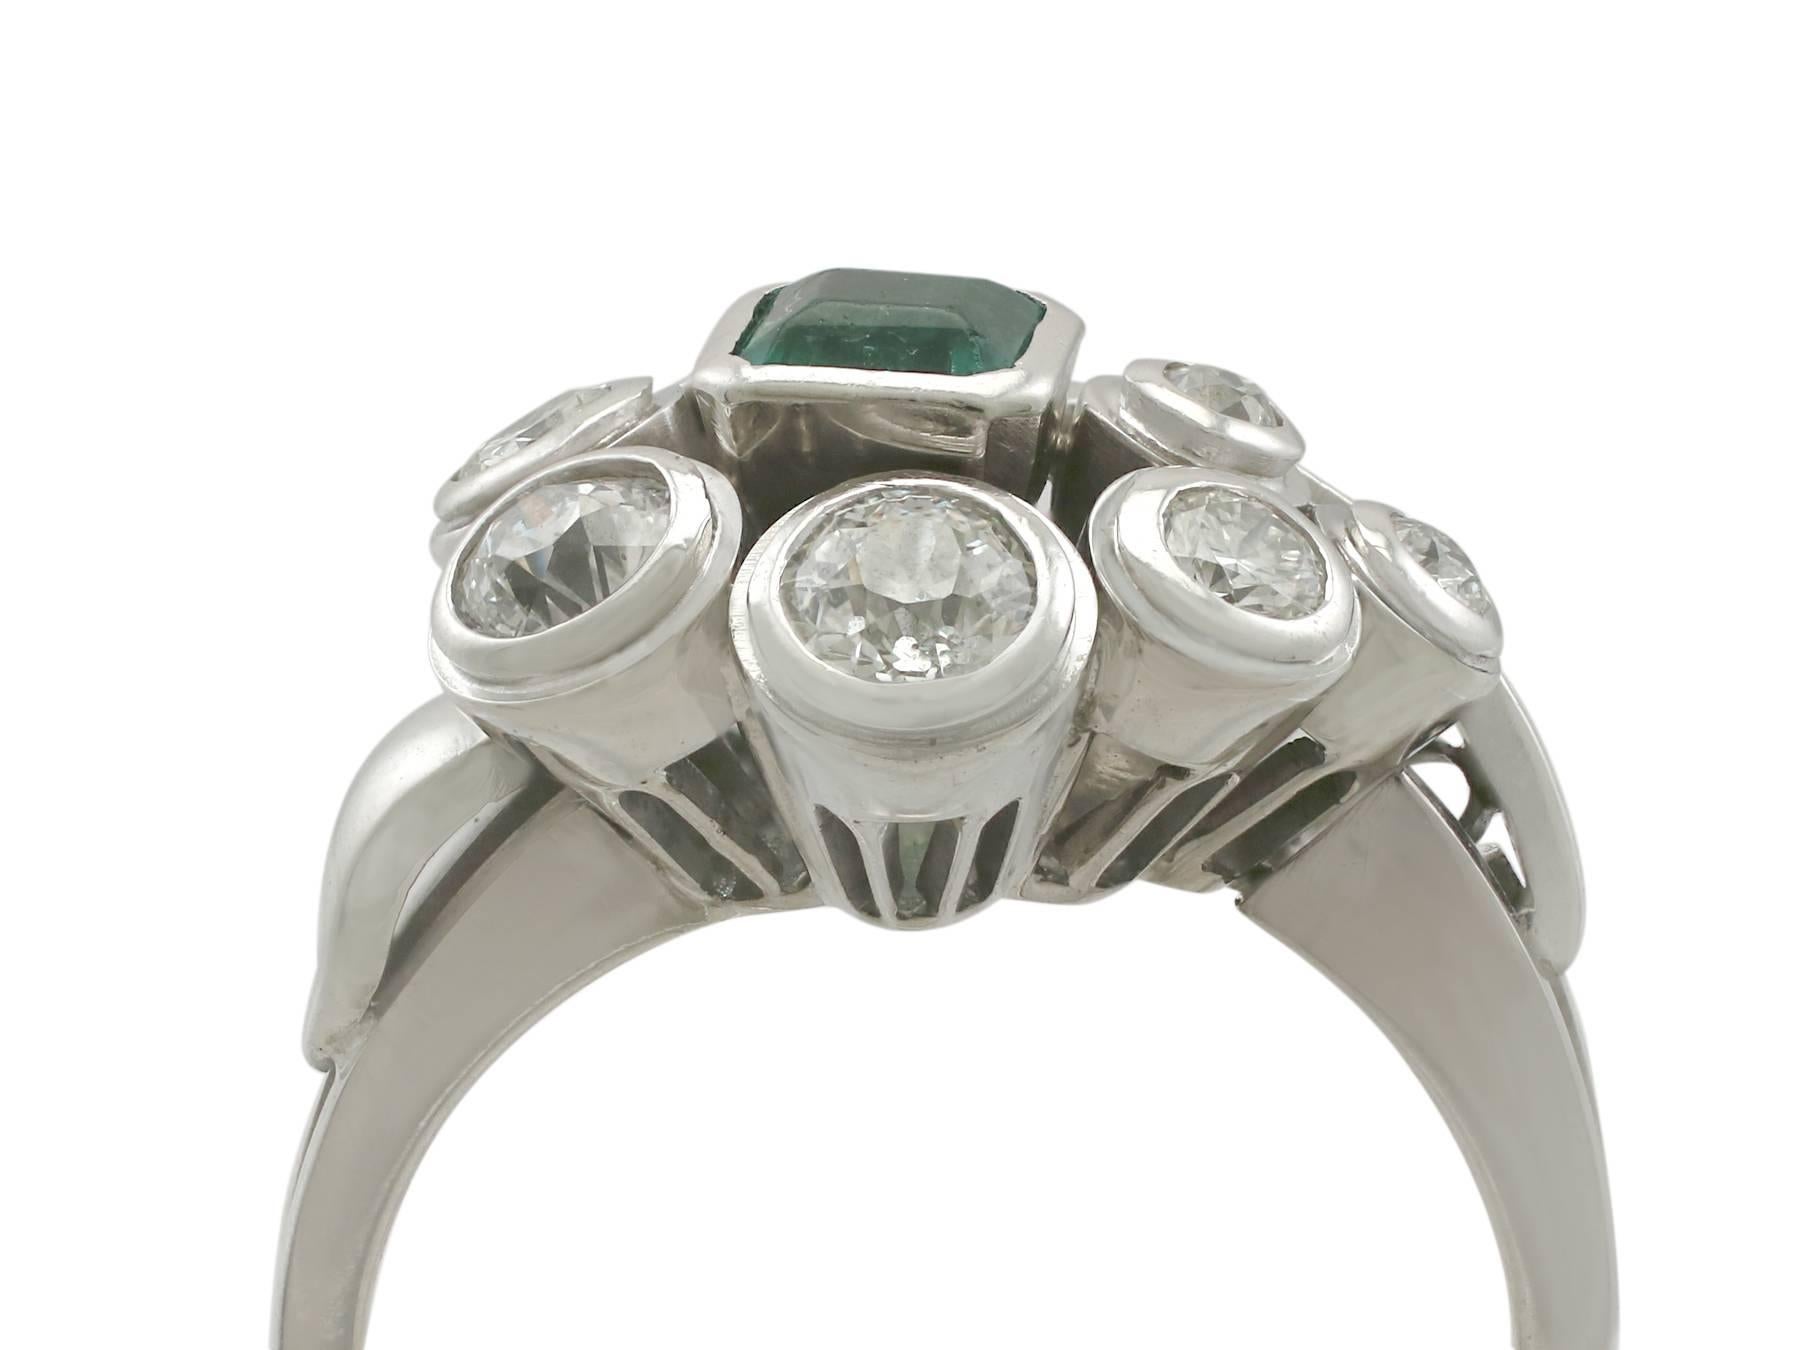 A fine and impressive 0.28 carat emerald and 0.95 carat diamond, 14 karat white gold dress ring; part of our diverse antique jewelry and estate jewelry collections

This fine and impressive emerald dress ring has been crafted in 14 k white